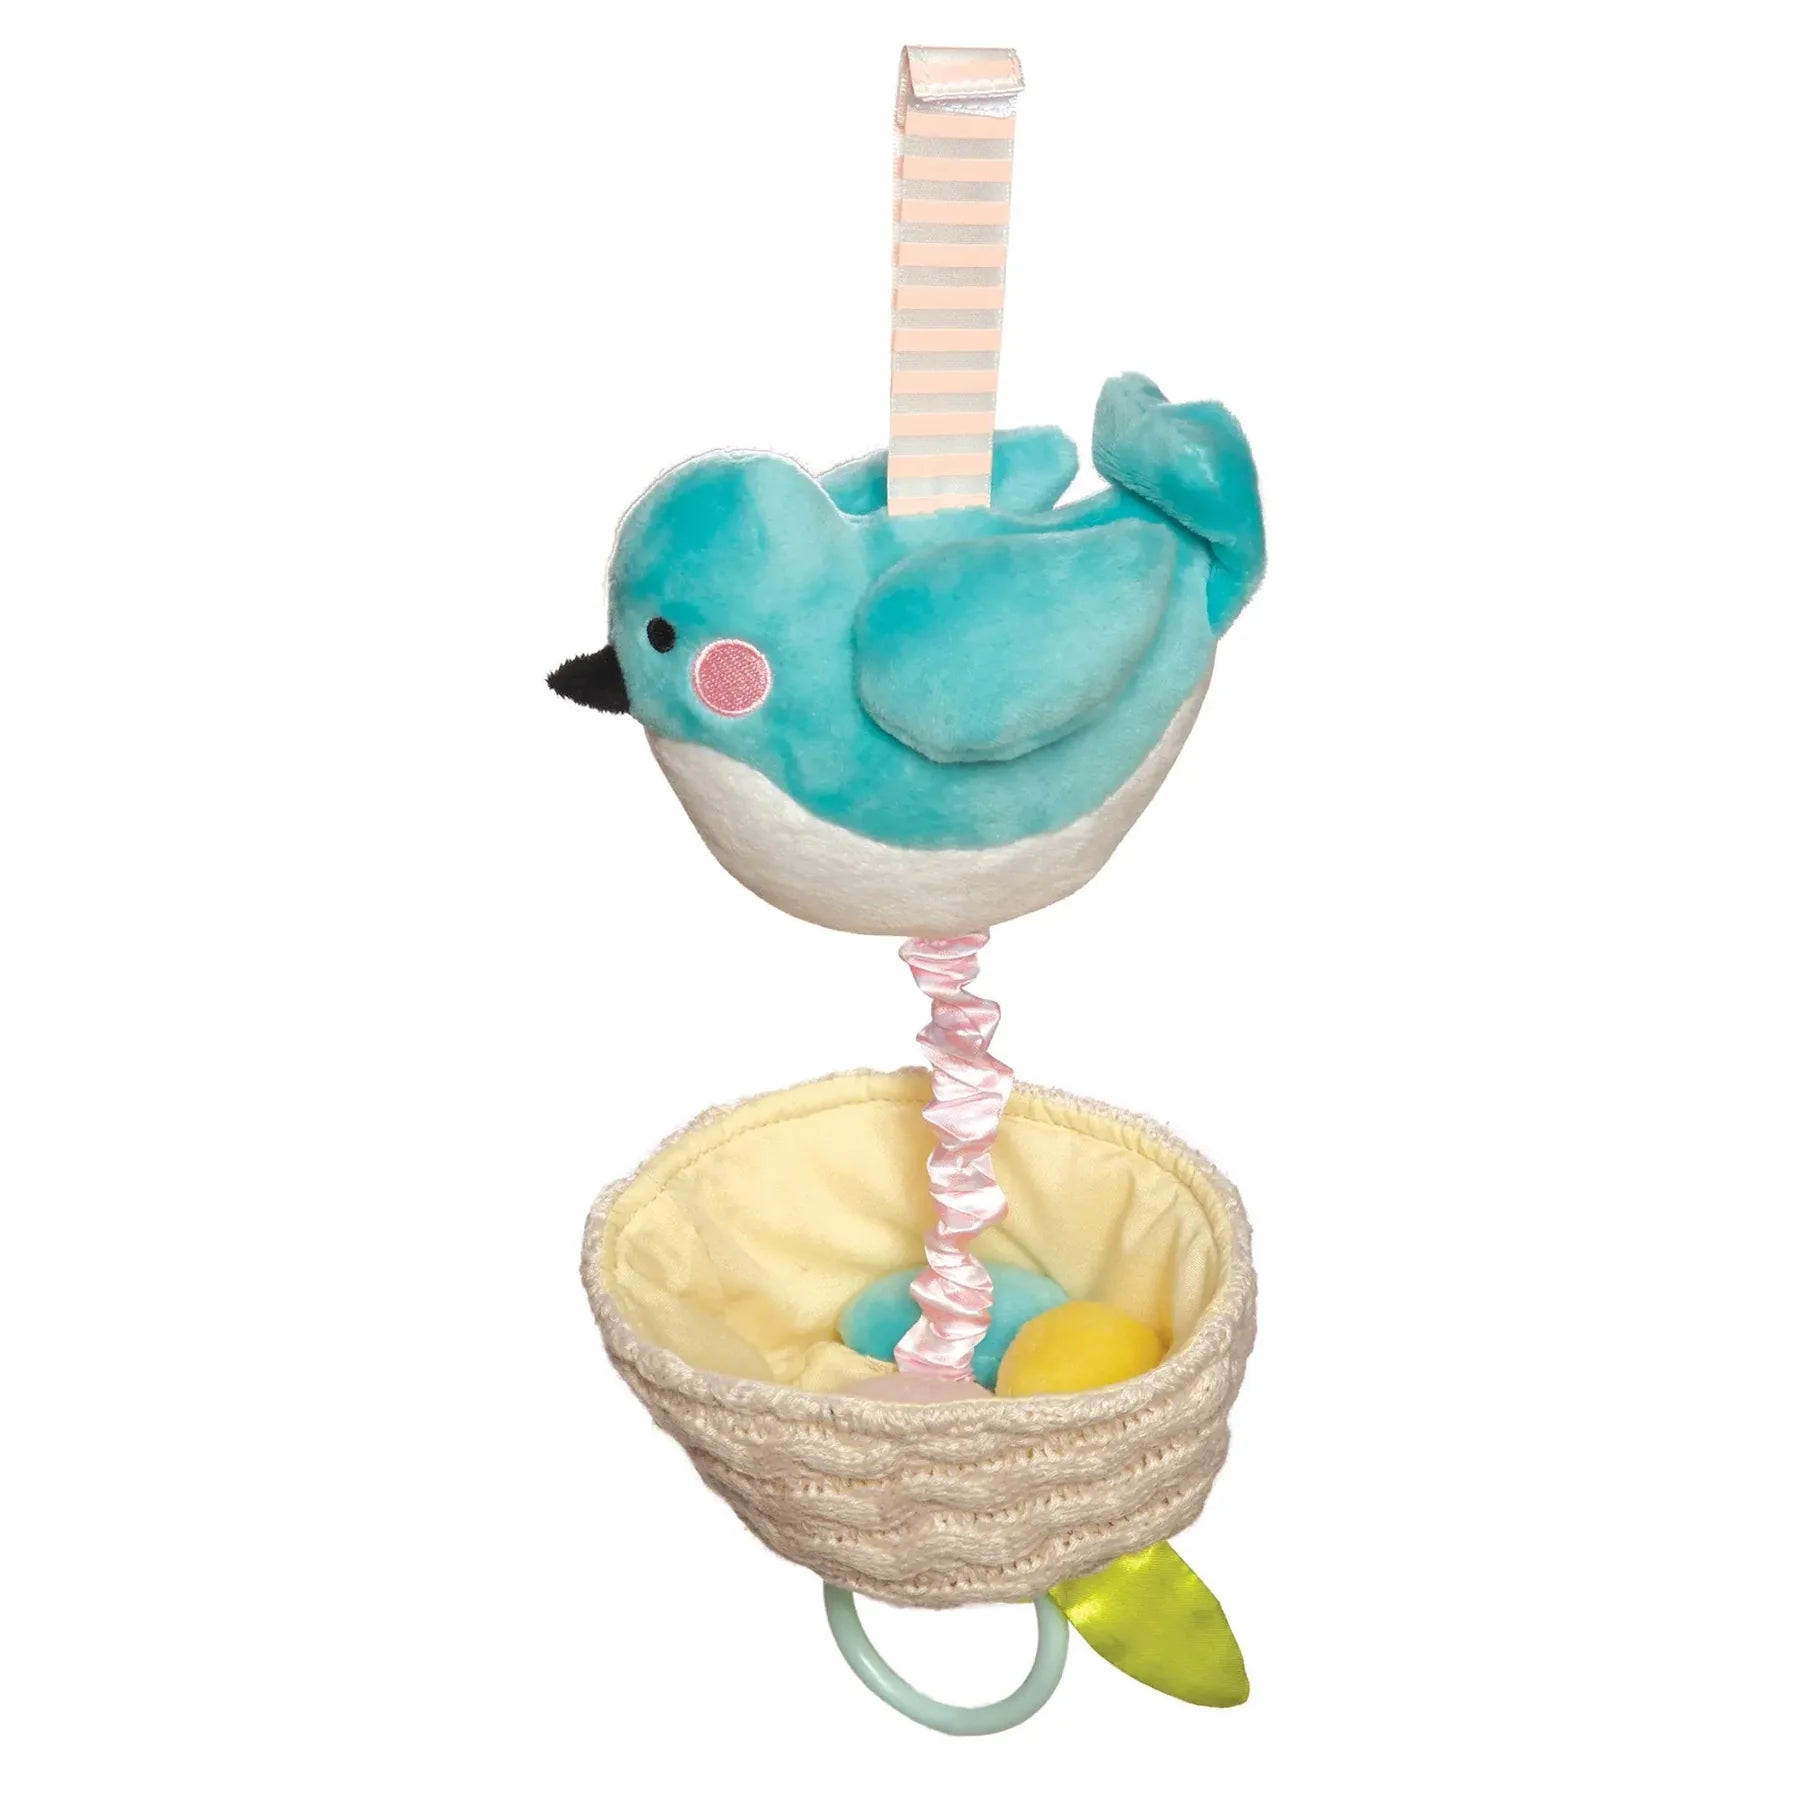 Manhattan Toy Company Lullaby Bird Pull Musical Toy for babies